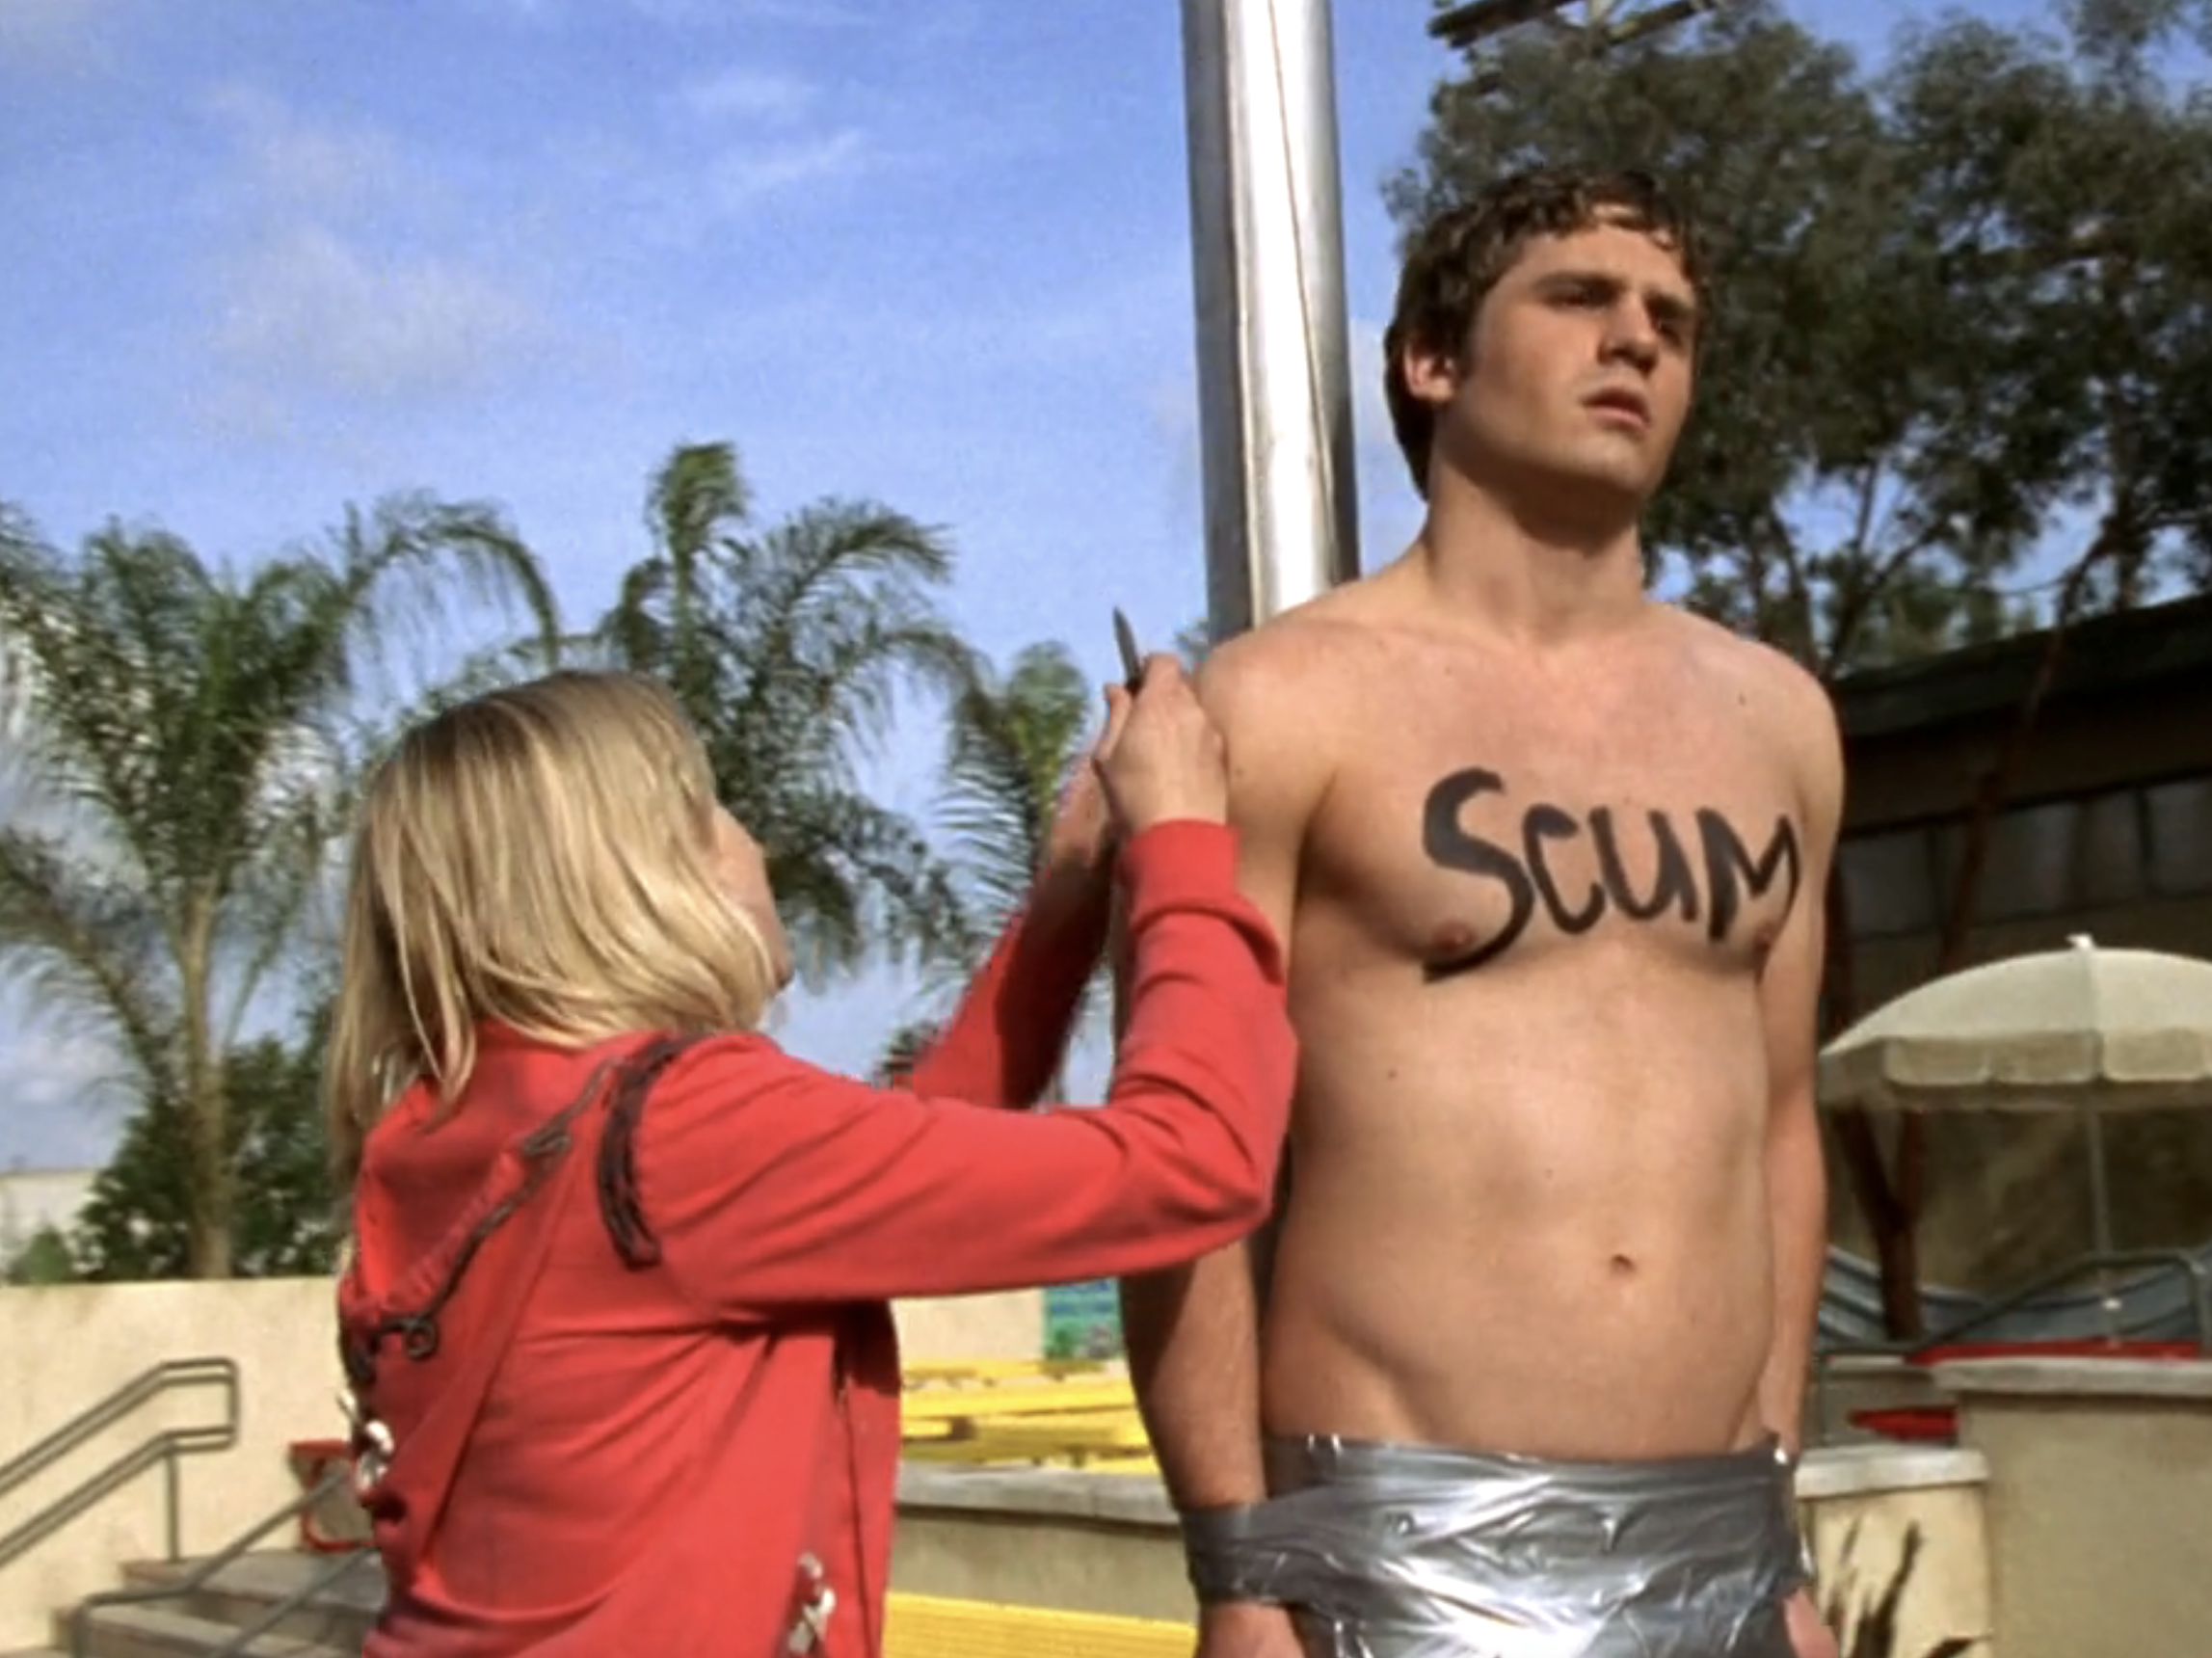 Screenshot from S1E20 of veronica Mars. Tad is taped to the flagpole naked. "SCUM" is written on his chest in black. Veronica is about to cut him down from the flagpole with a knife.